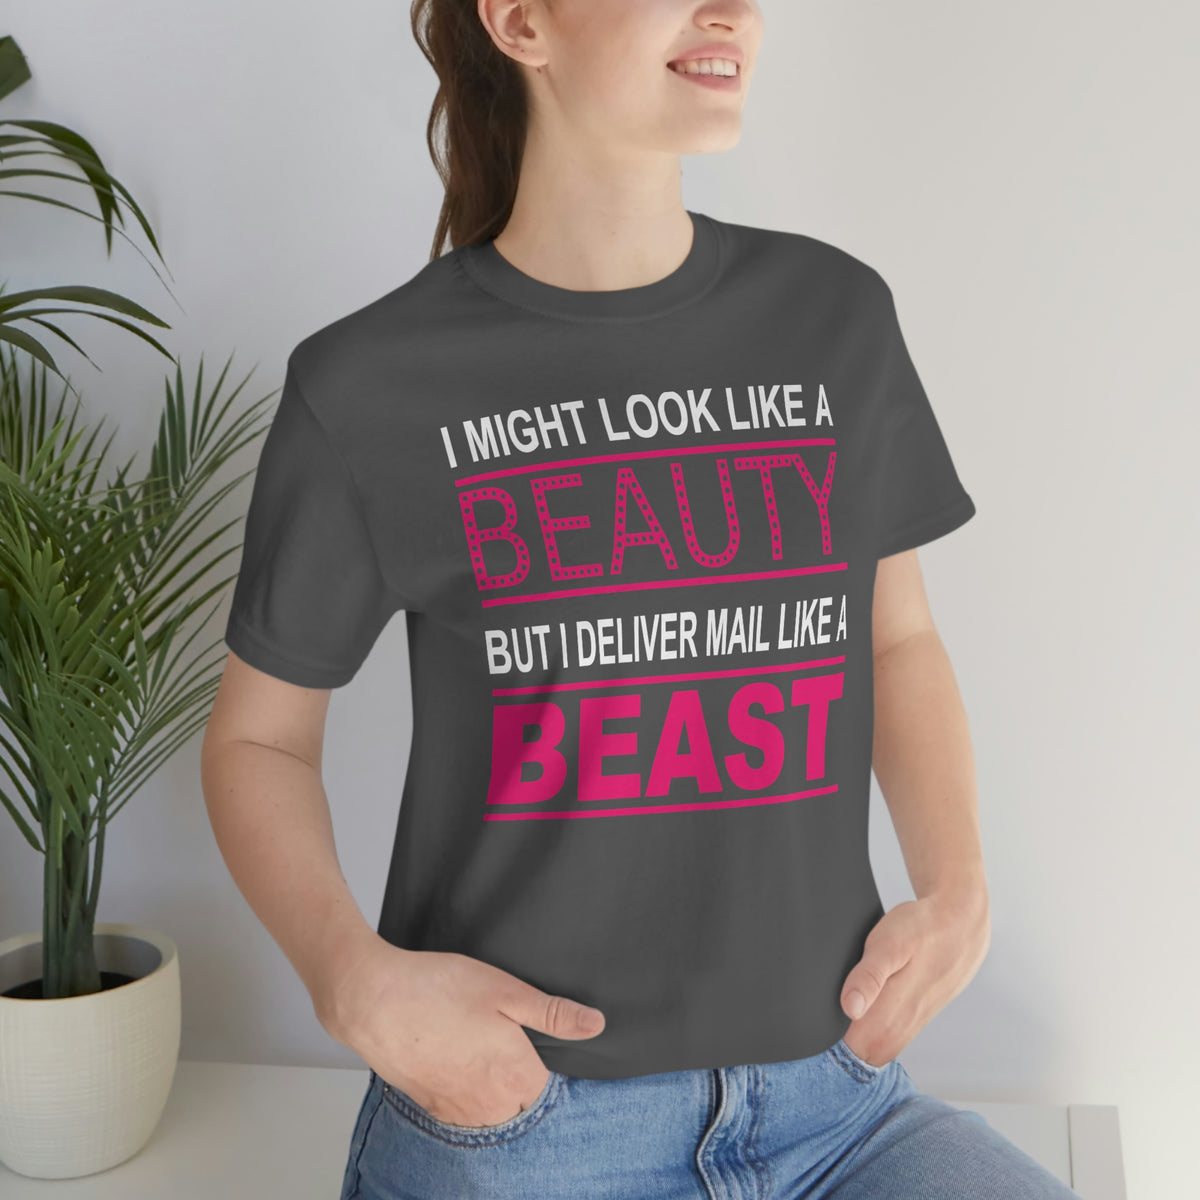 Mail Carrier Deliver Mail Like a Beast T-Shirt